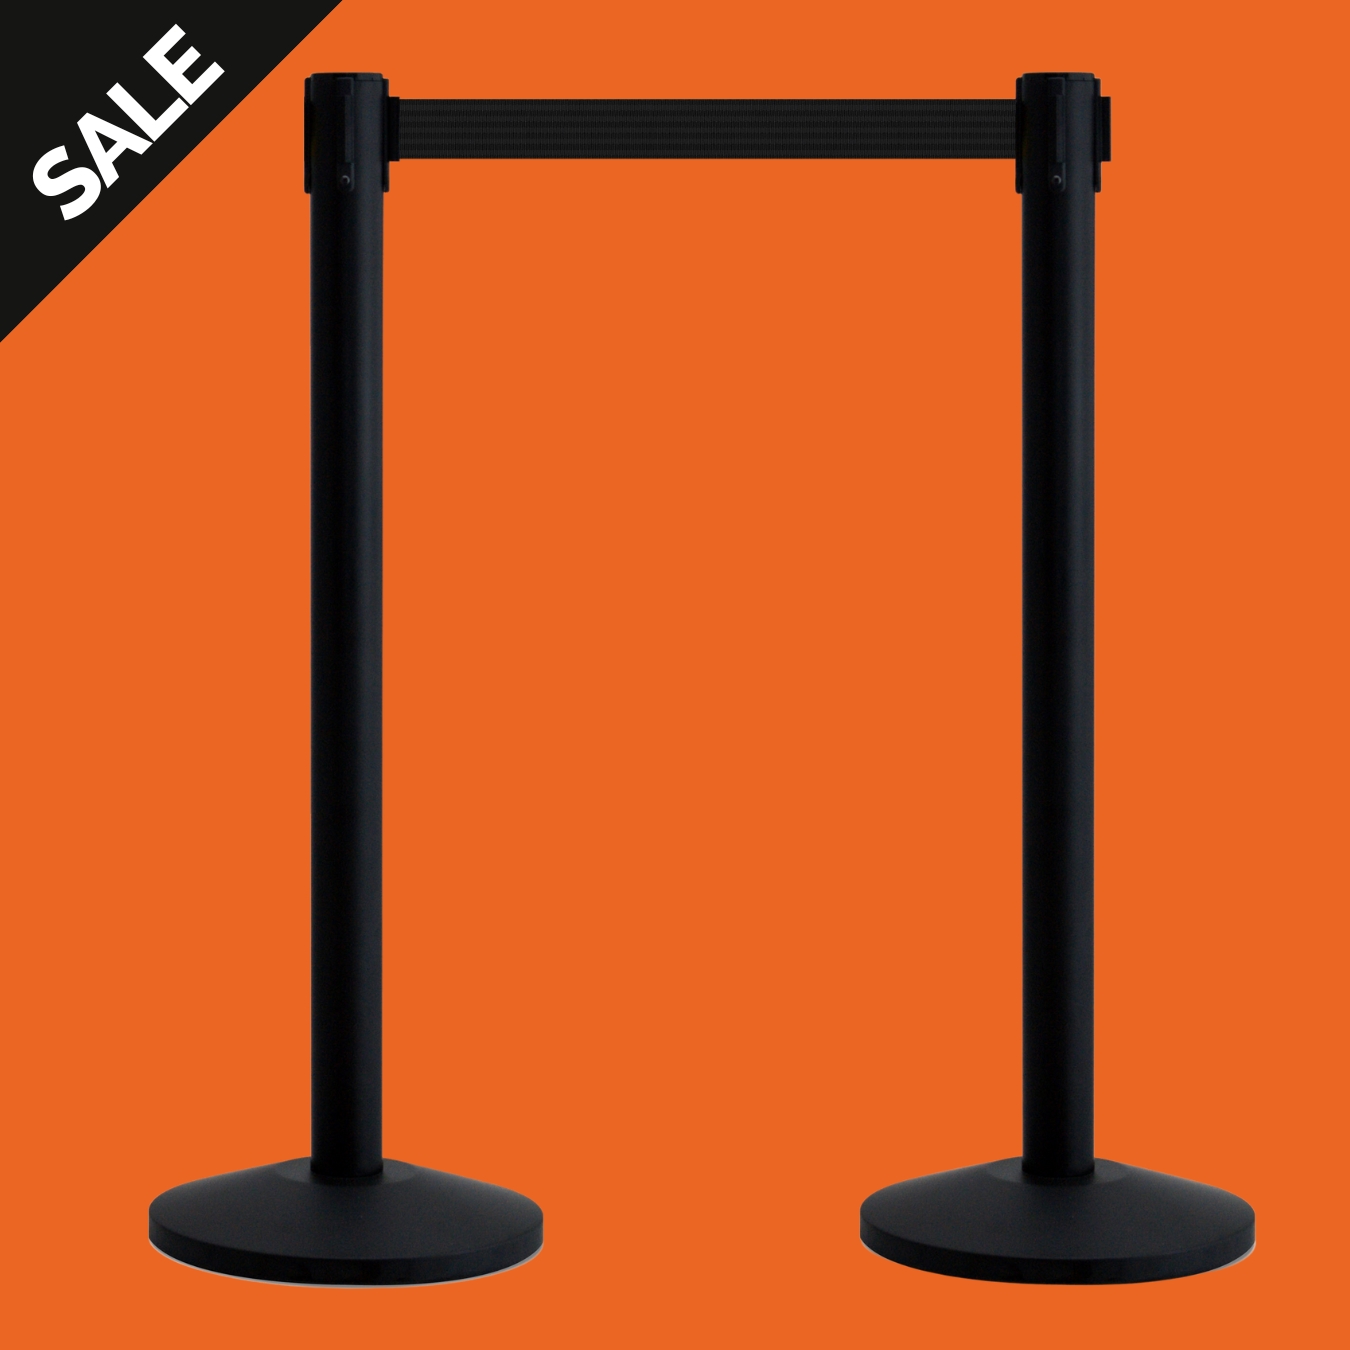 Two QueueWay Retractable Belt Barriers with Black Posts and Black Webbing